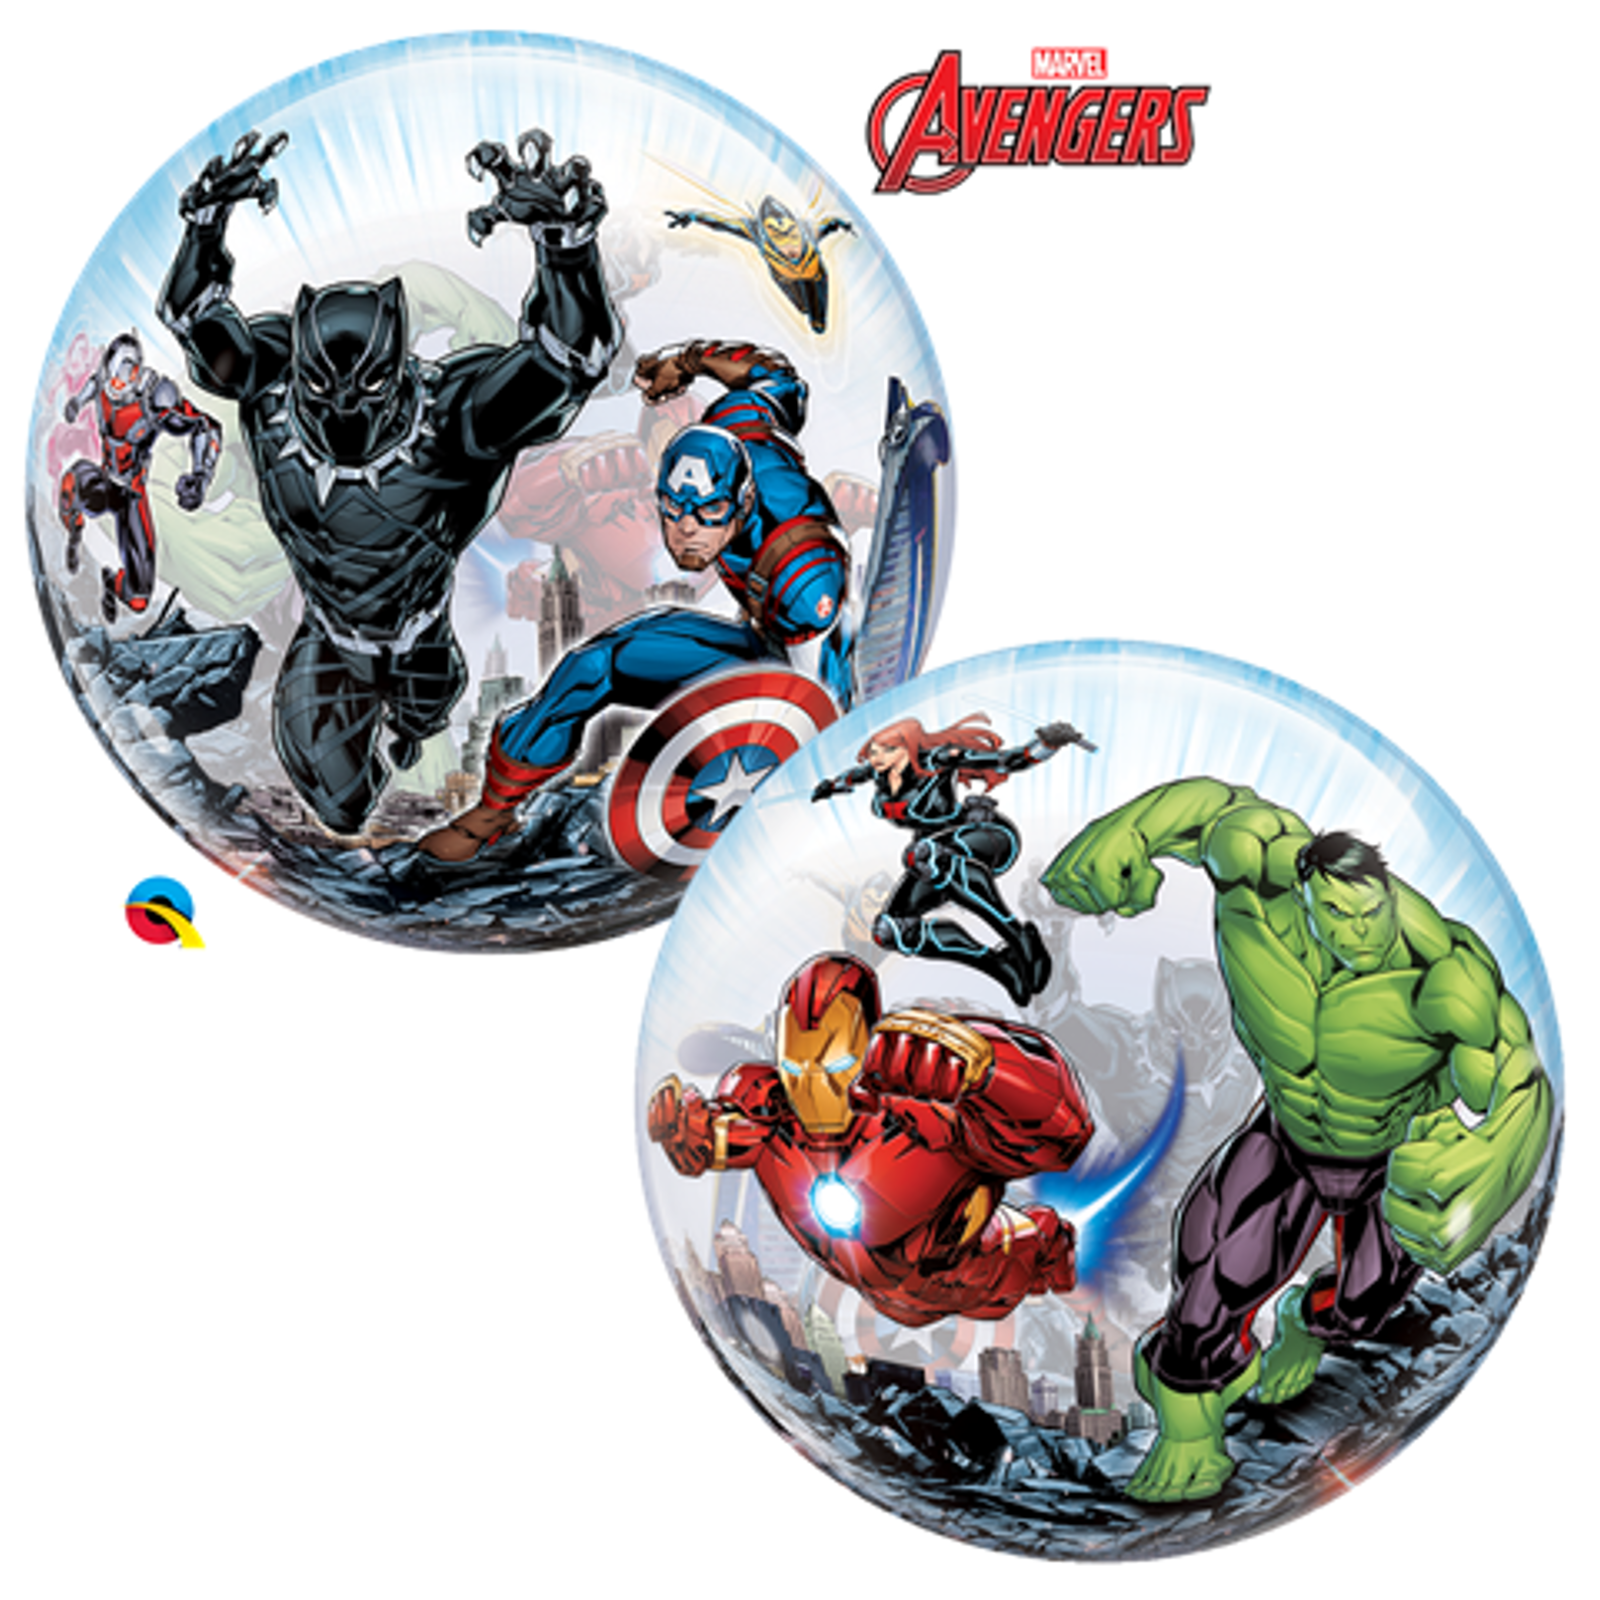 COLLECTION ONLY - 1 Marvel Avengers Bubble Balloon 22 Filled with Hel –  Party Supplies Manchester